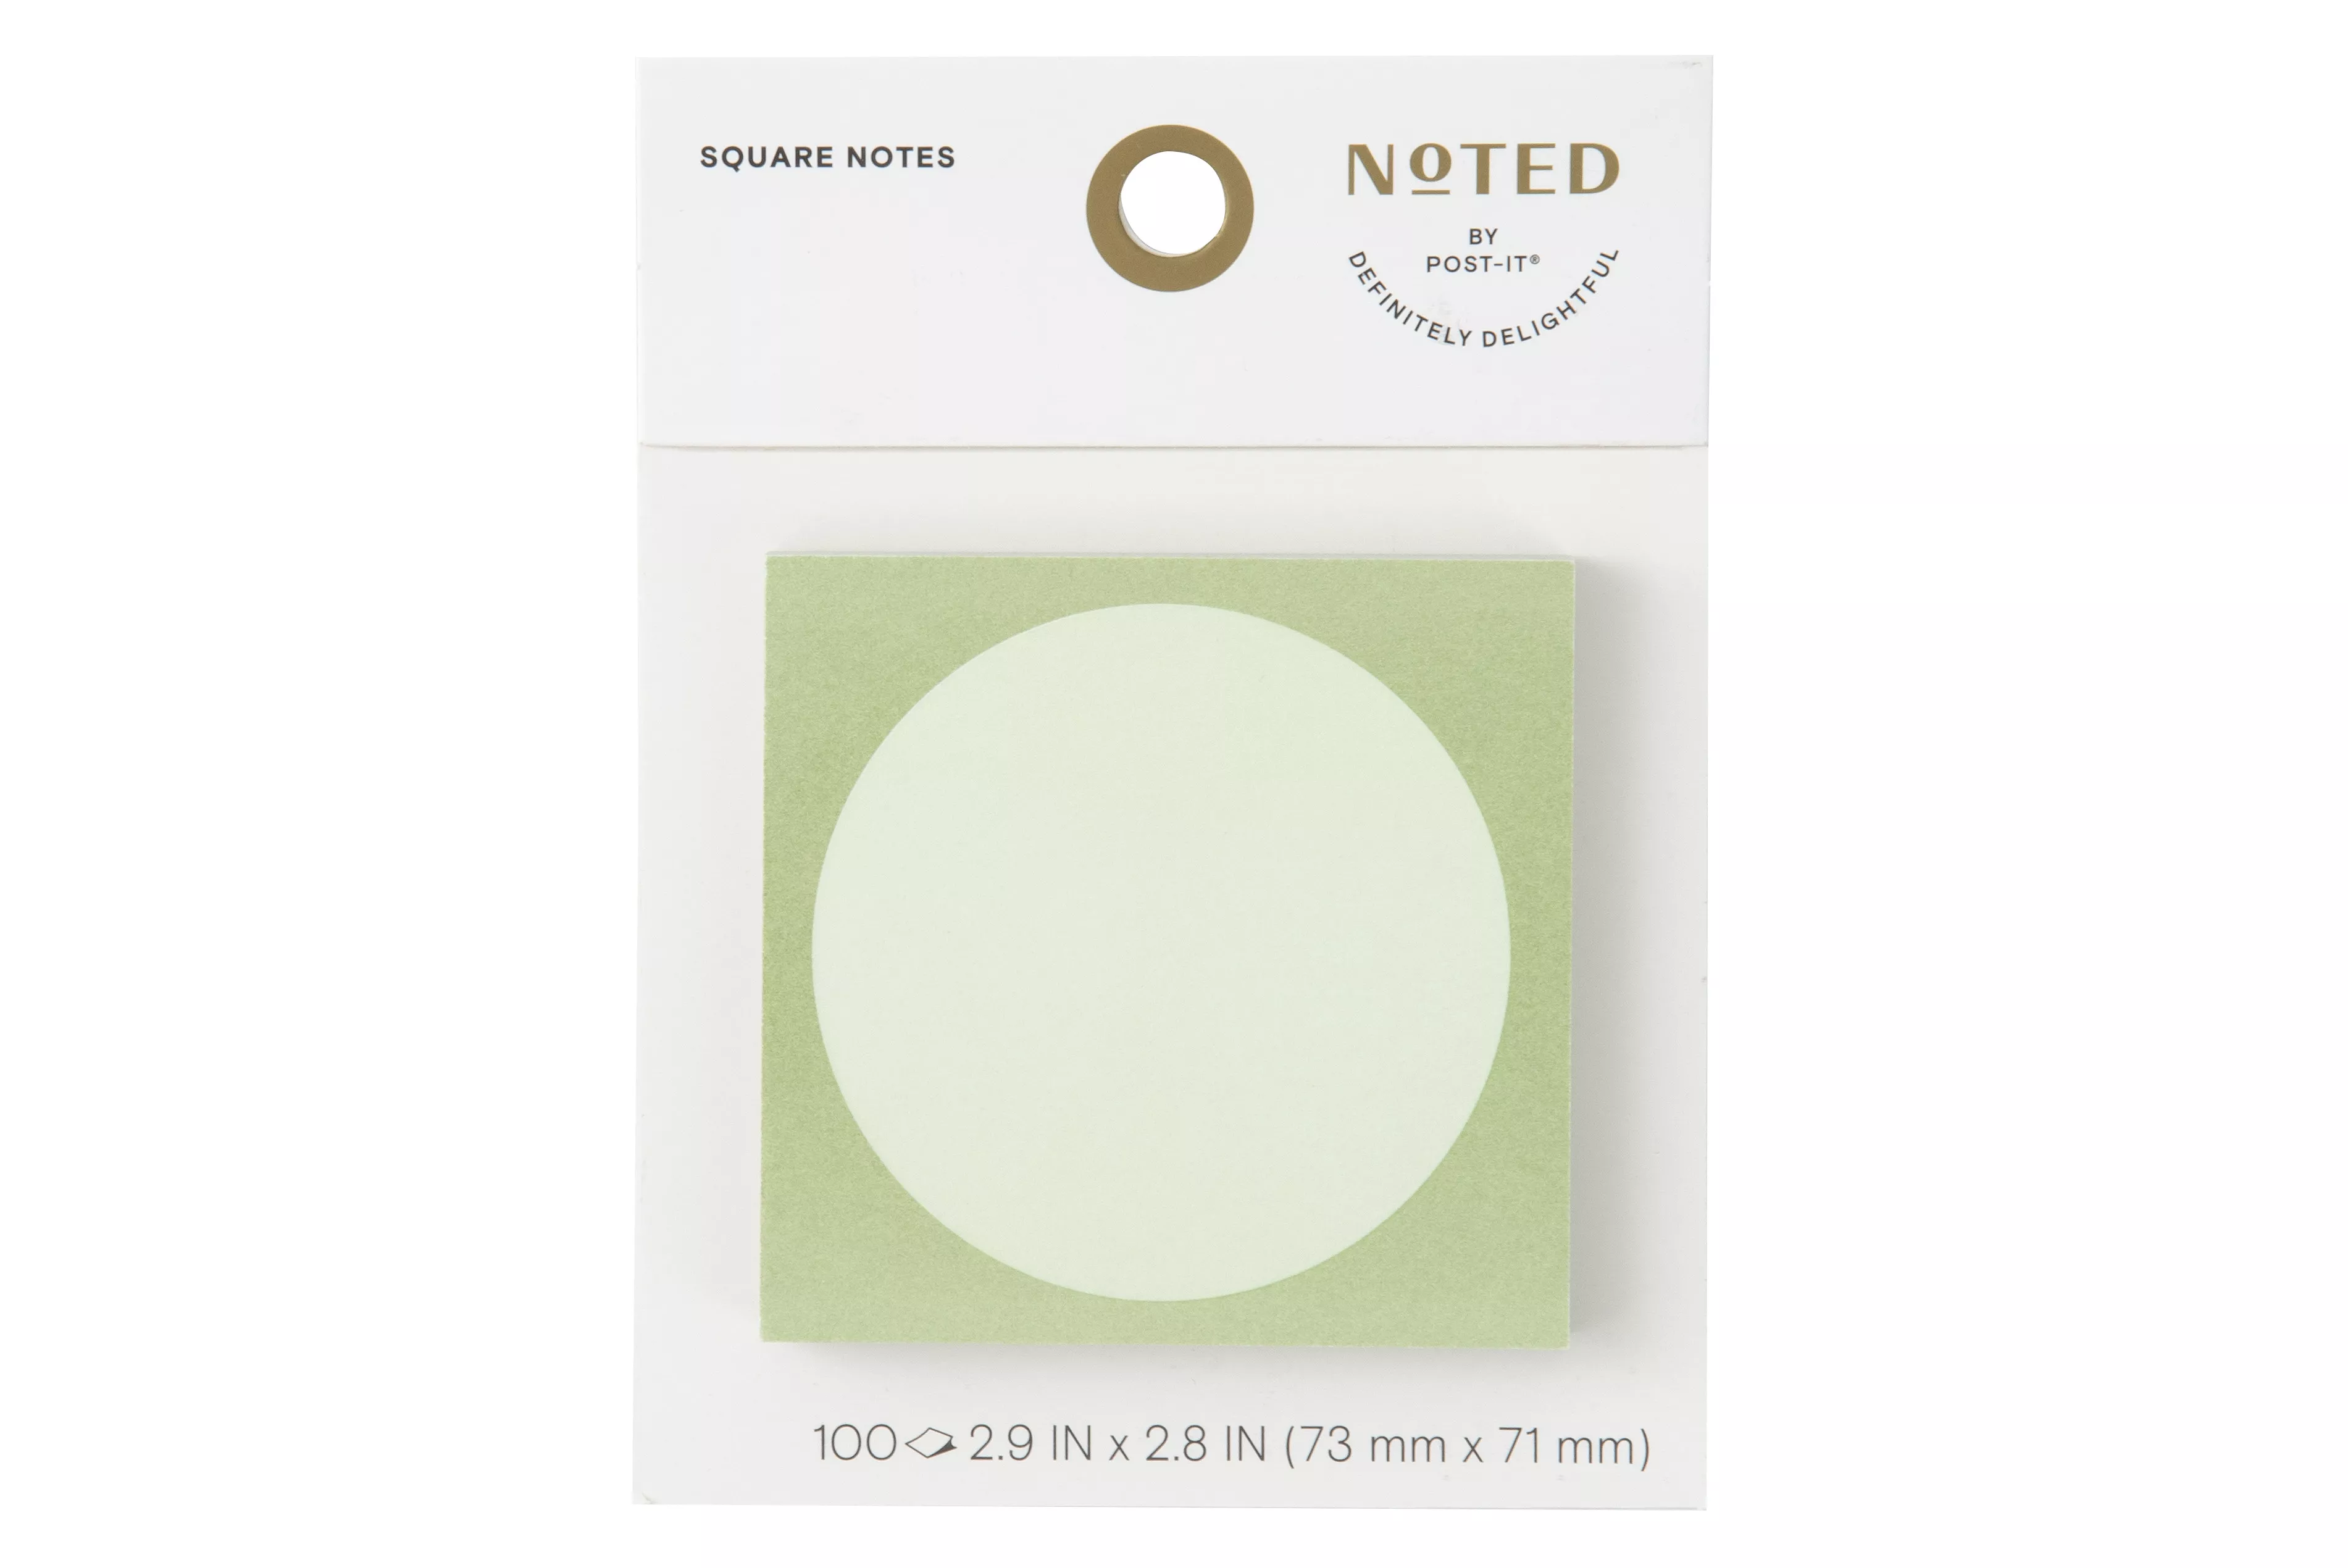 Post-it® Square Notes NTD6-33-3, 2.9 in x 2.8 in (73 mm x 71 mm)